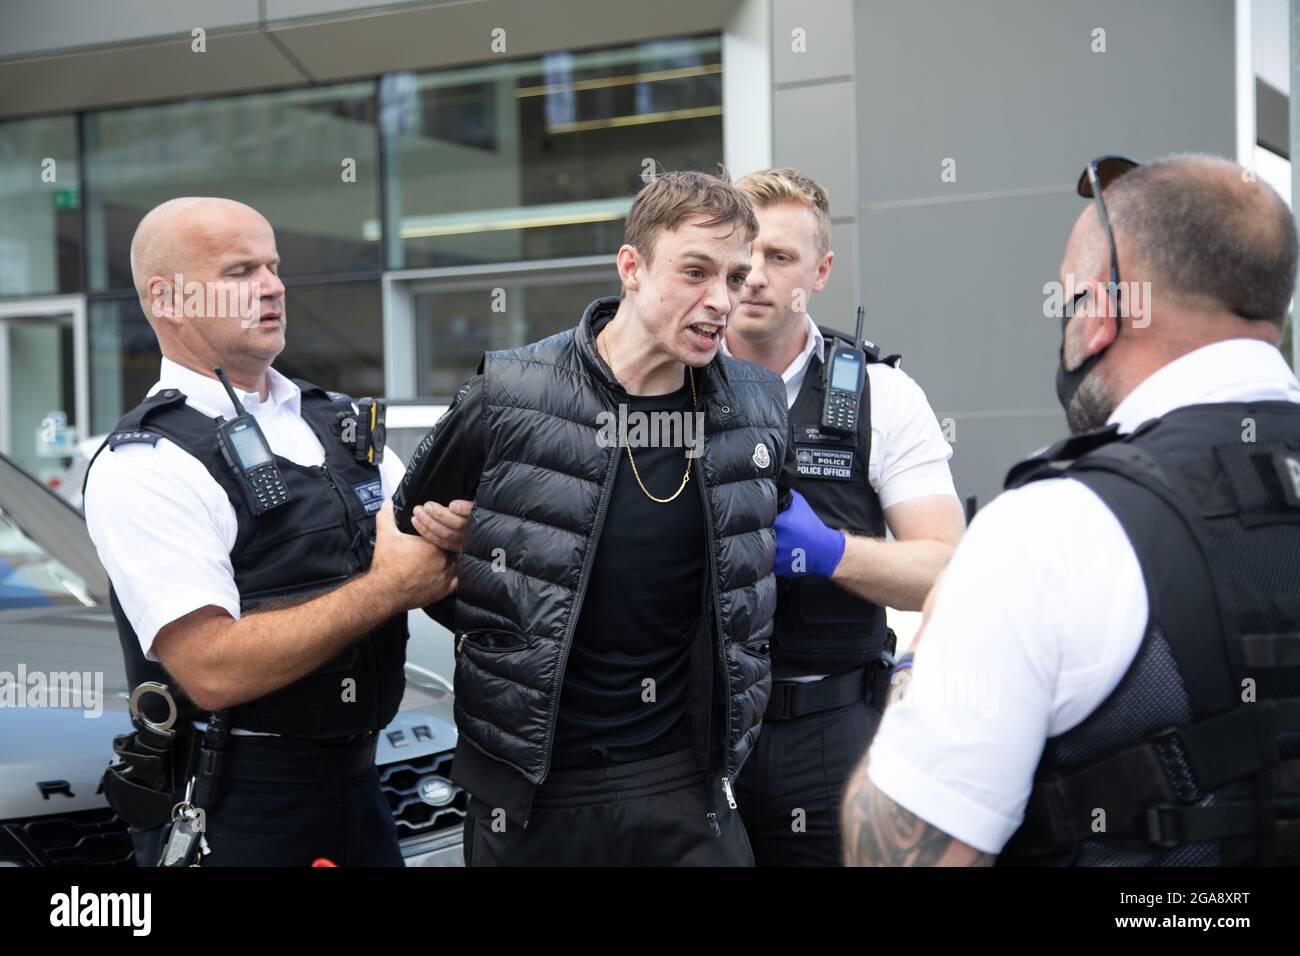 London, UK. 29th July, 2021. Officers from Operation Venice, which tackles  moped-enabled crime, arrest a suspect in Battersea, London after a chase.  Credit: Andy Sillett/Alamy Live News Stock Photo - Alamy